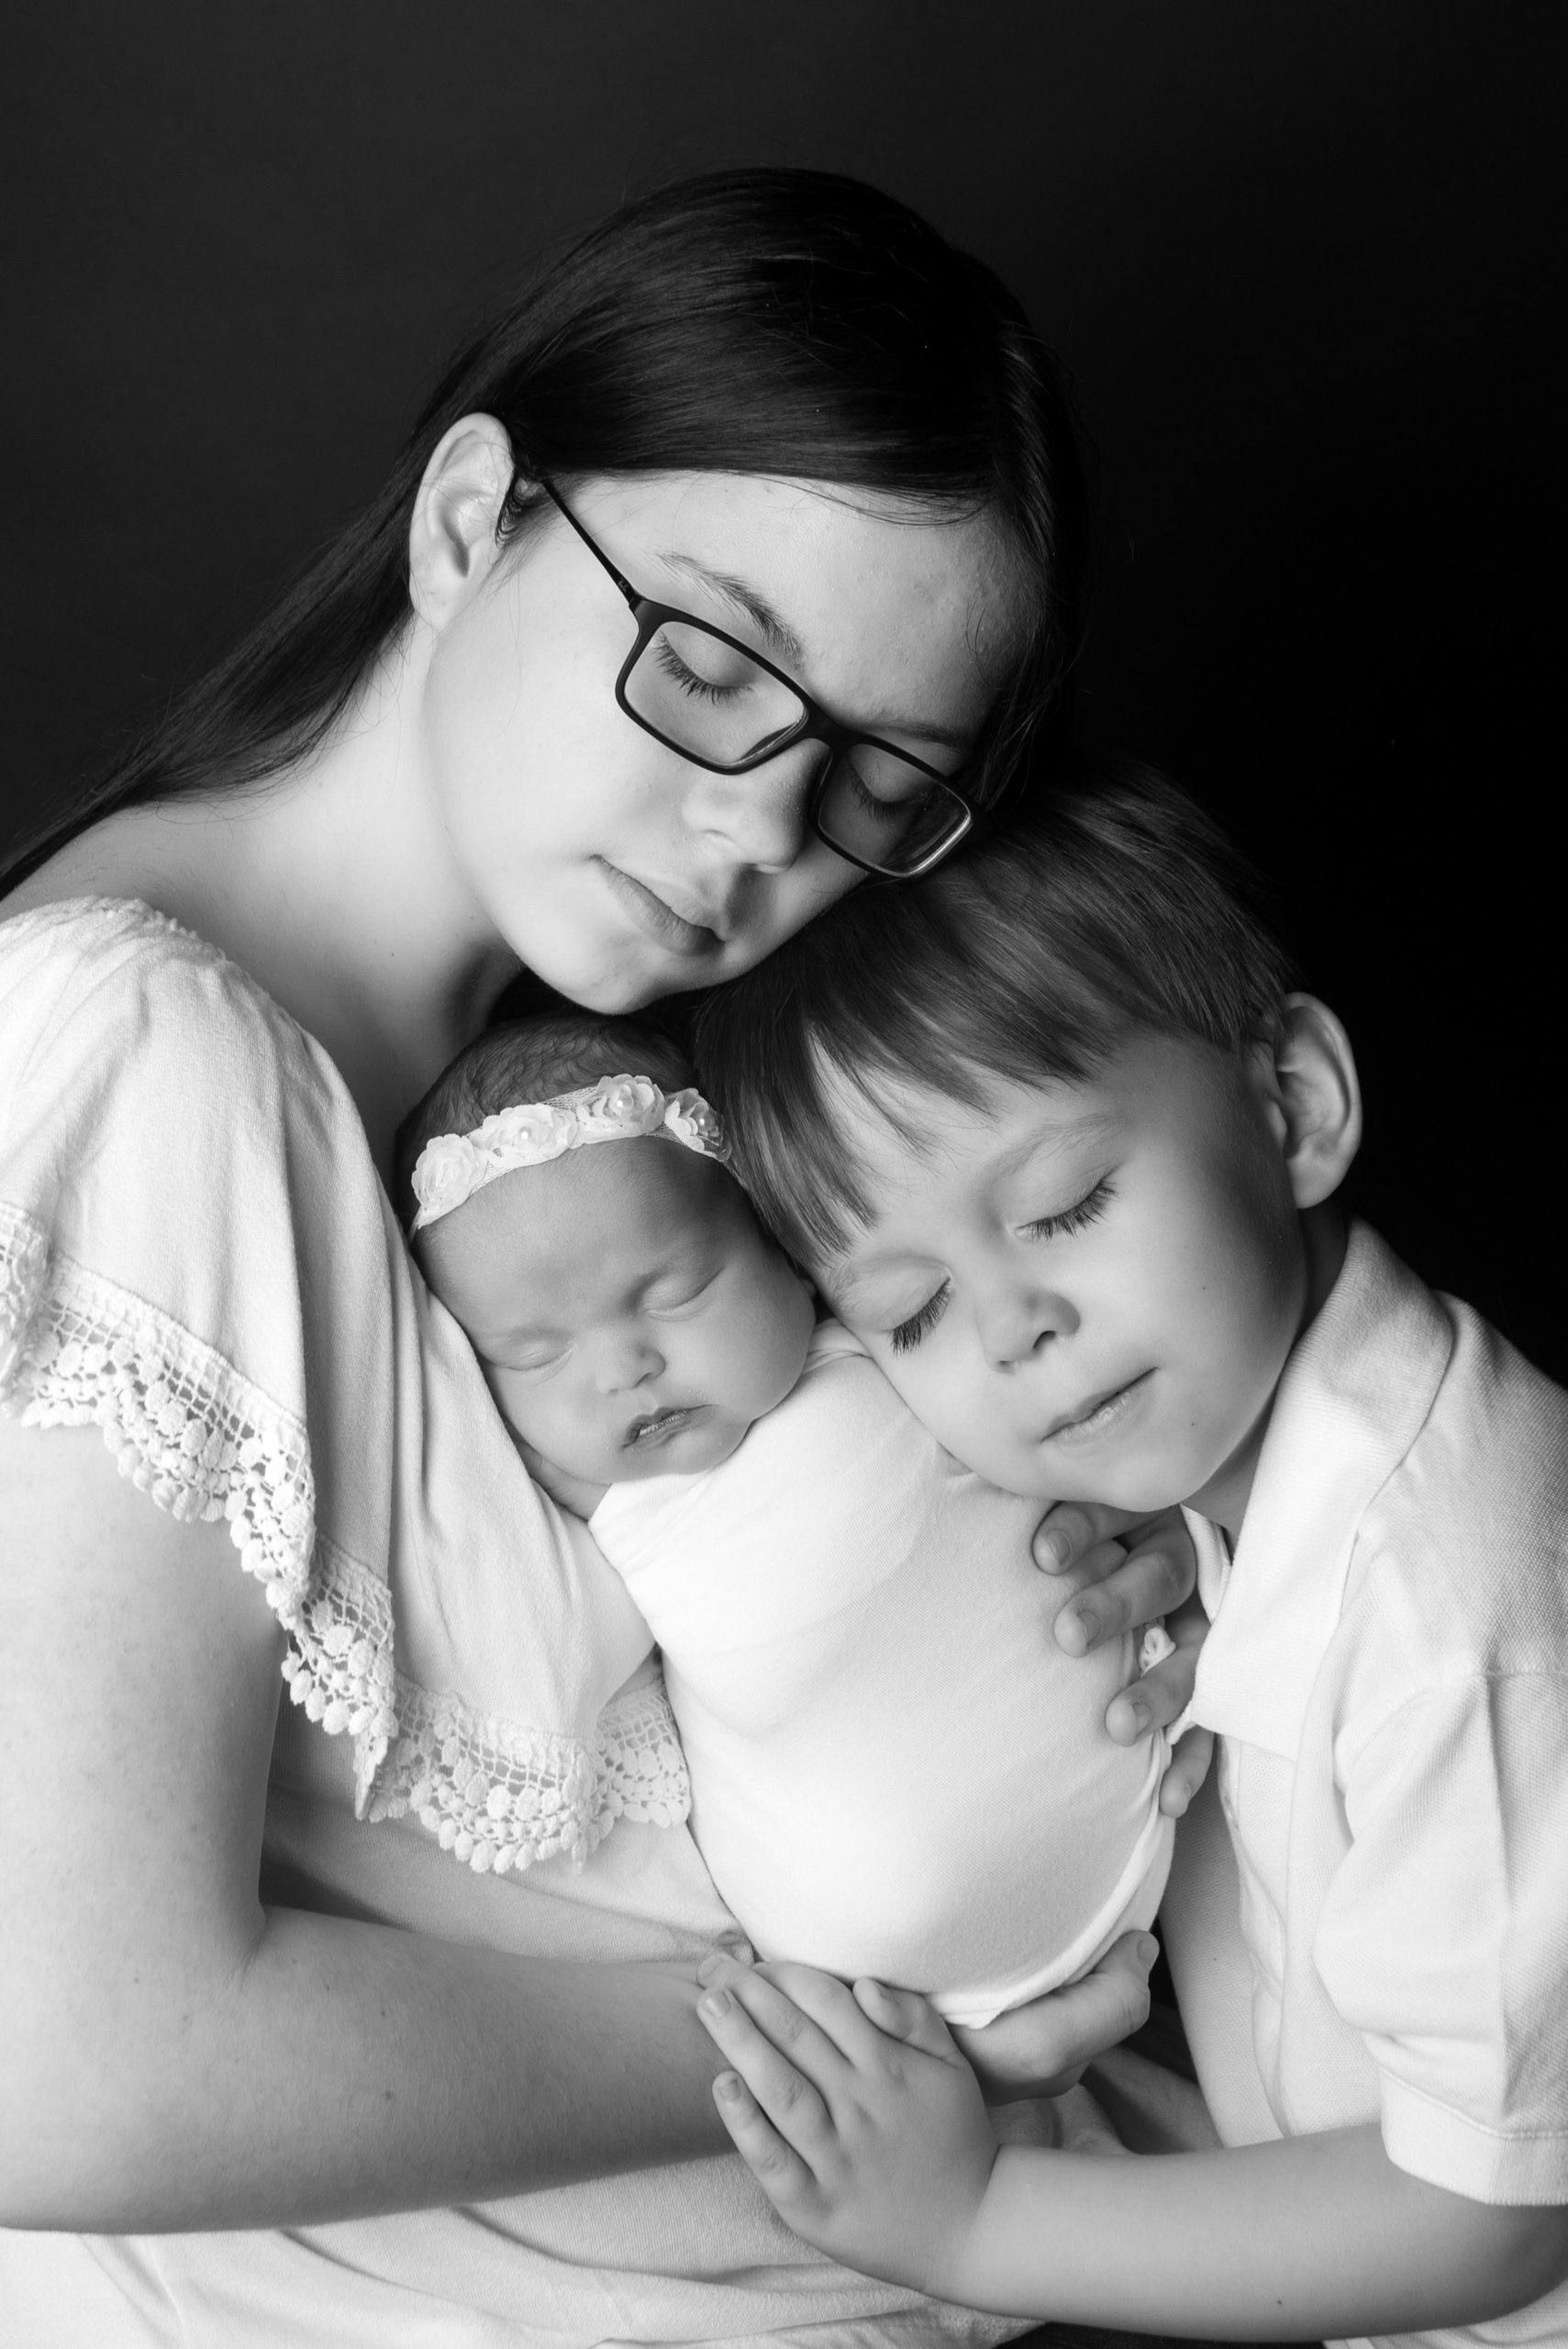 st-louis-newborn-photographer-black-and-white-picture-of-baby-girl-with-big-brother-and-sister-eye-closed.jpg